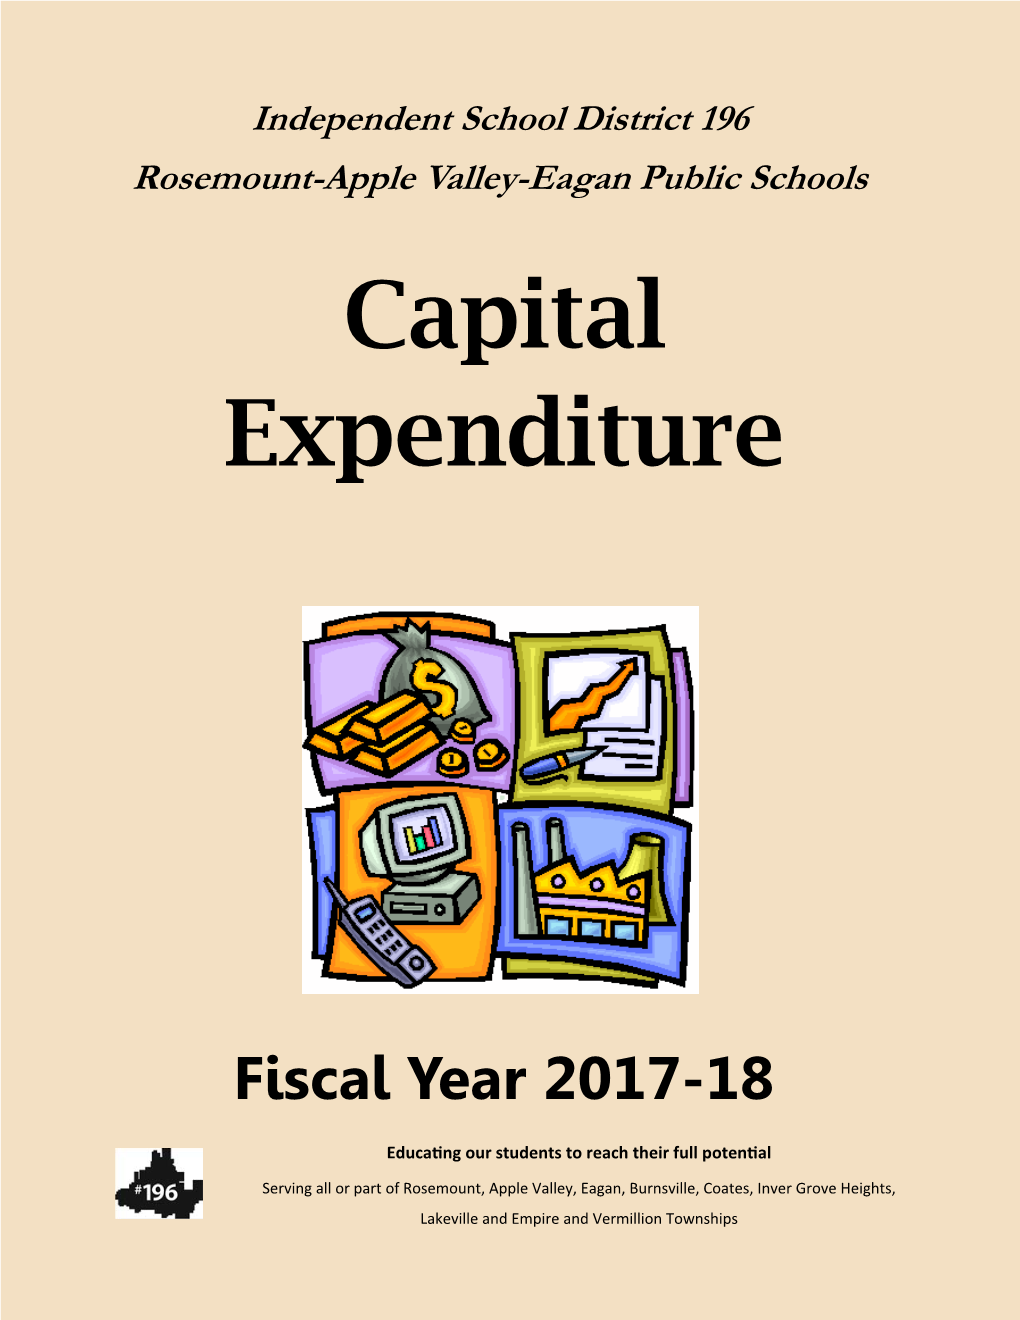 Capital Expenditure Budget Fiscal Year Ending June 30, 2018